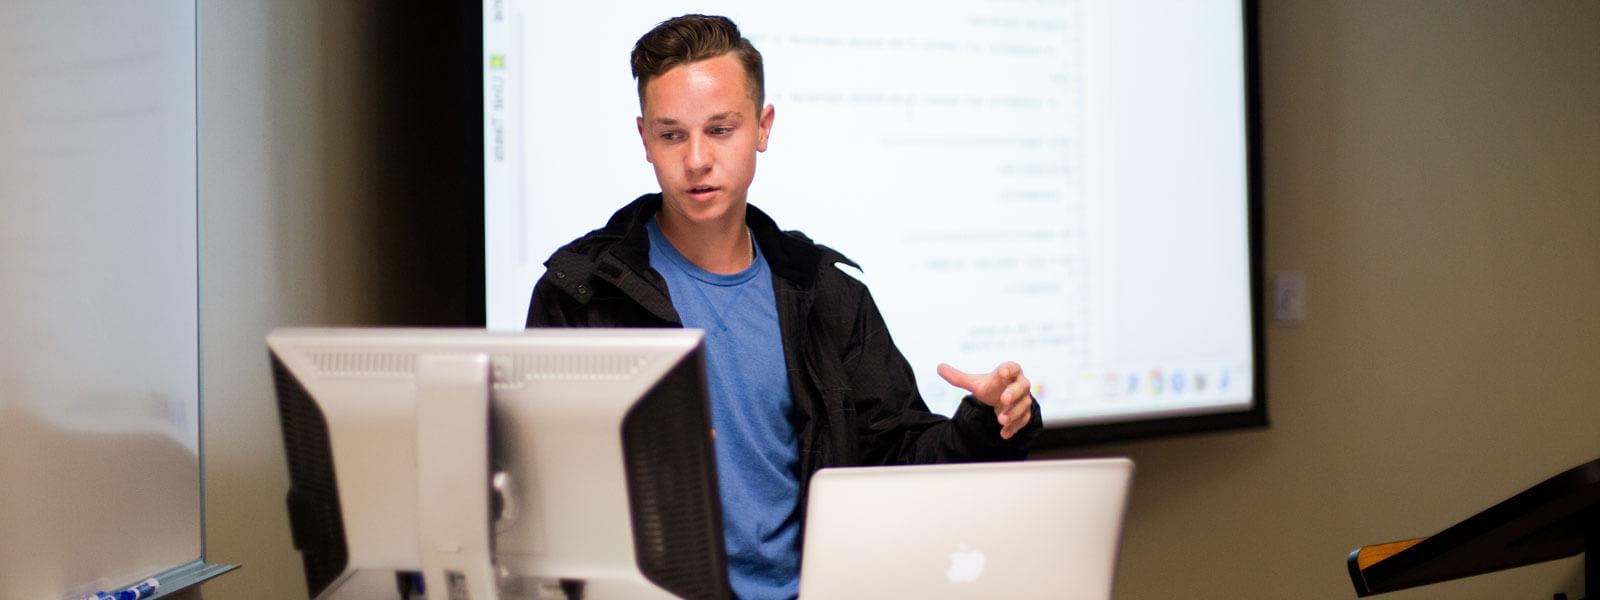 student looks at computer screen while giving class presentation